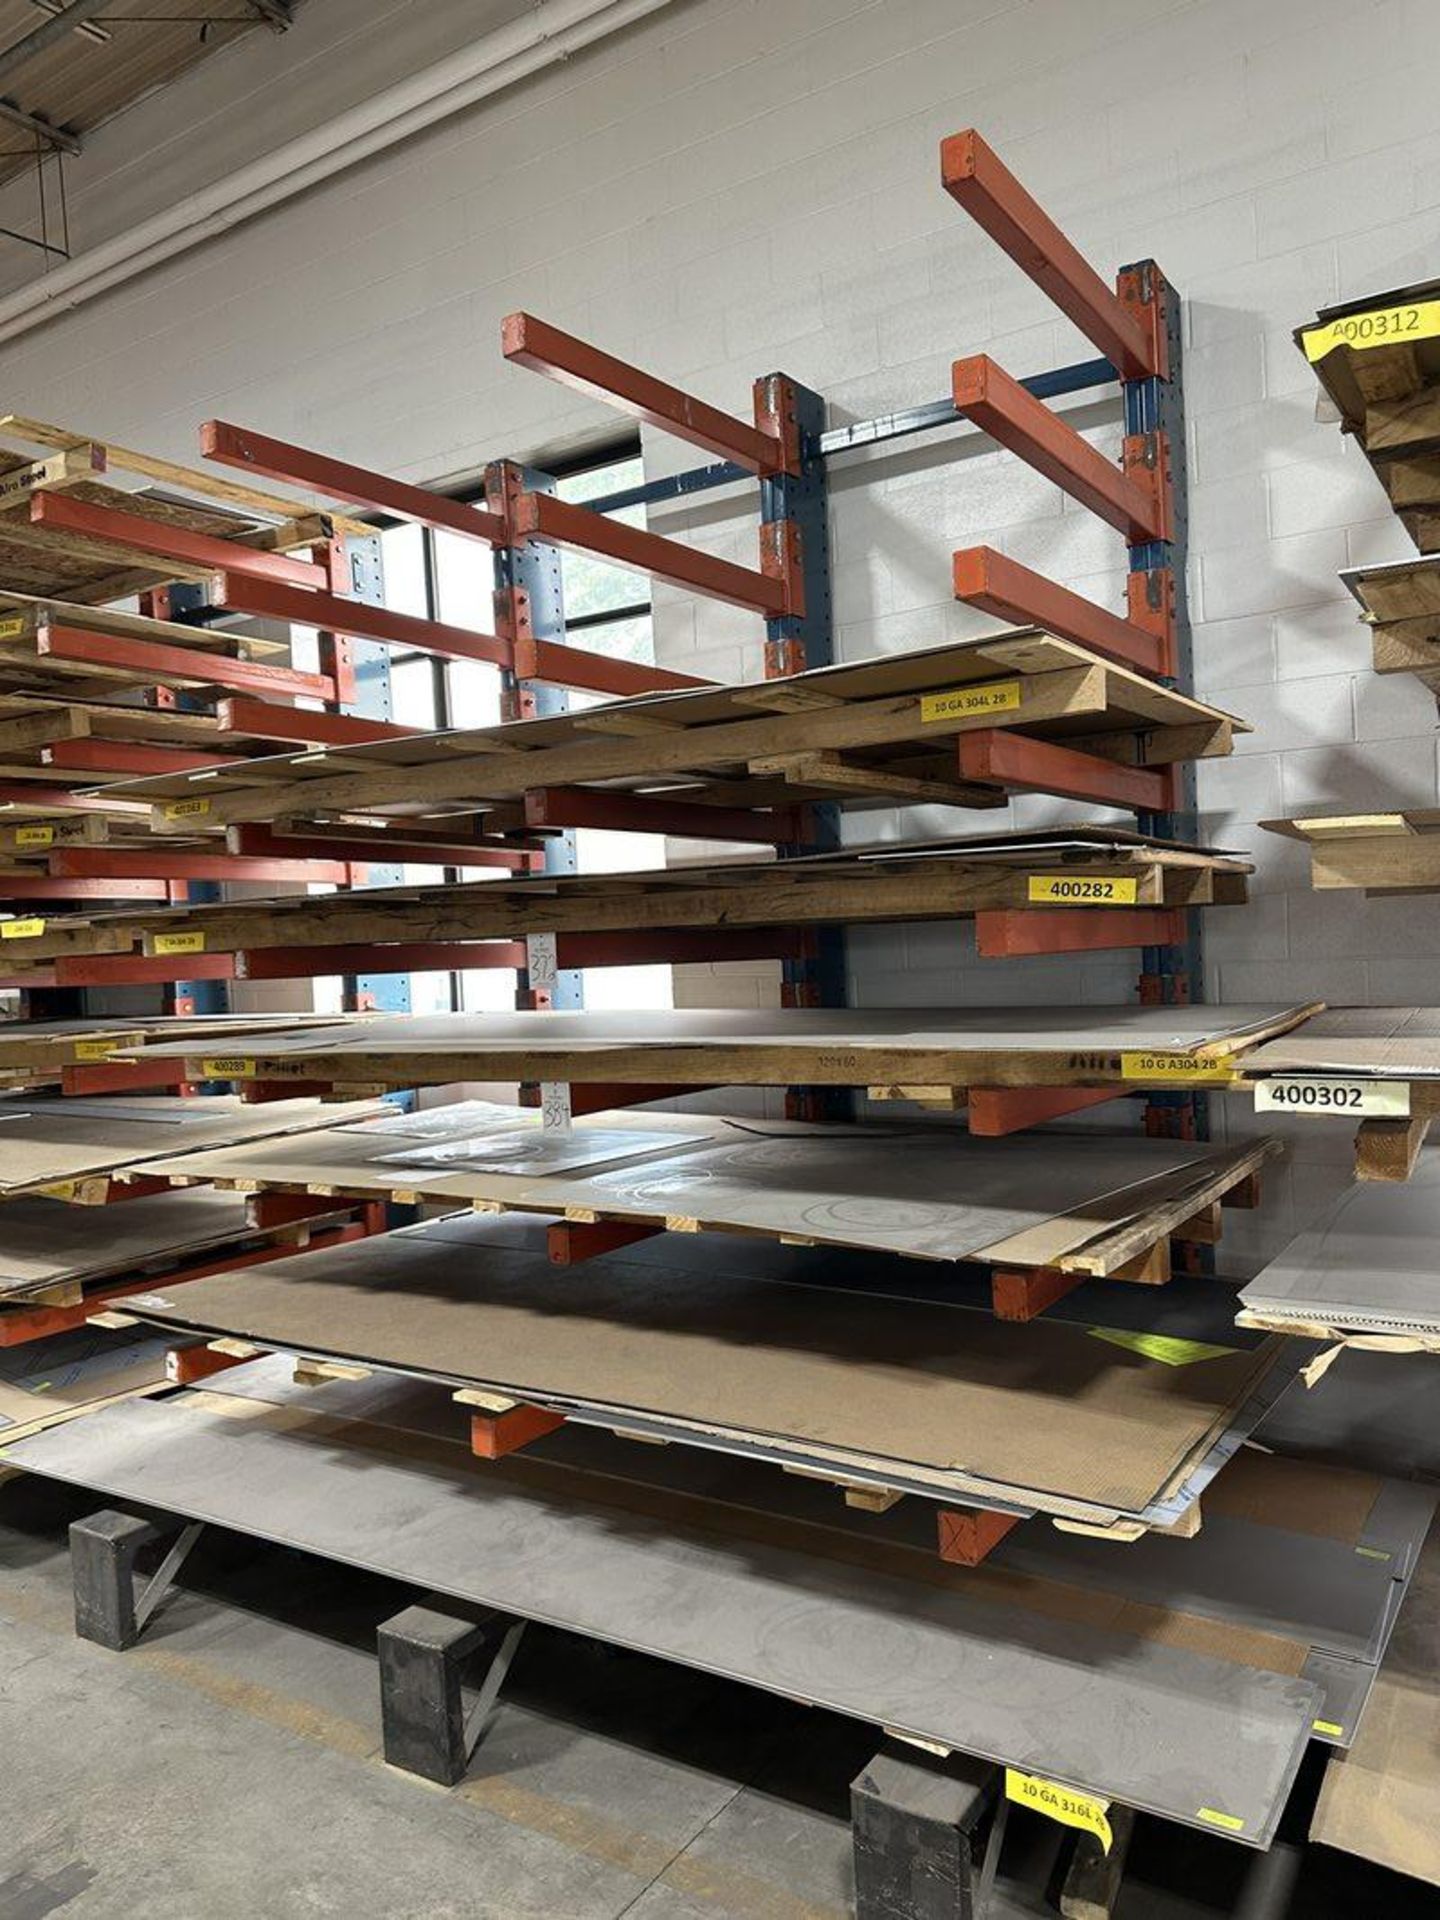 9-Shelf Single Sided Cantilever Rack, 12' T x 9' W x 5' D - Image 2 of 2